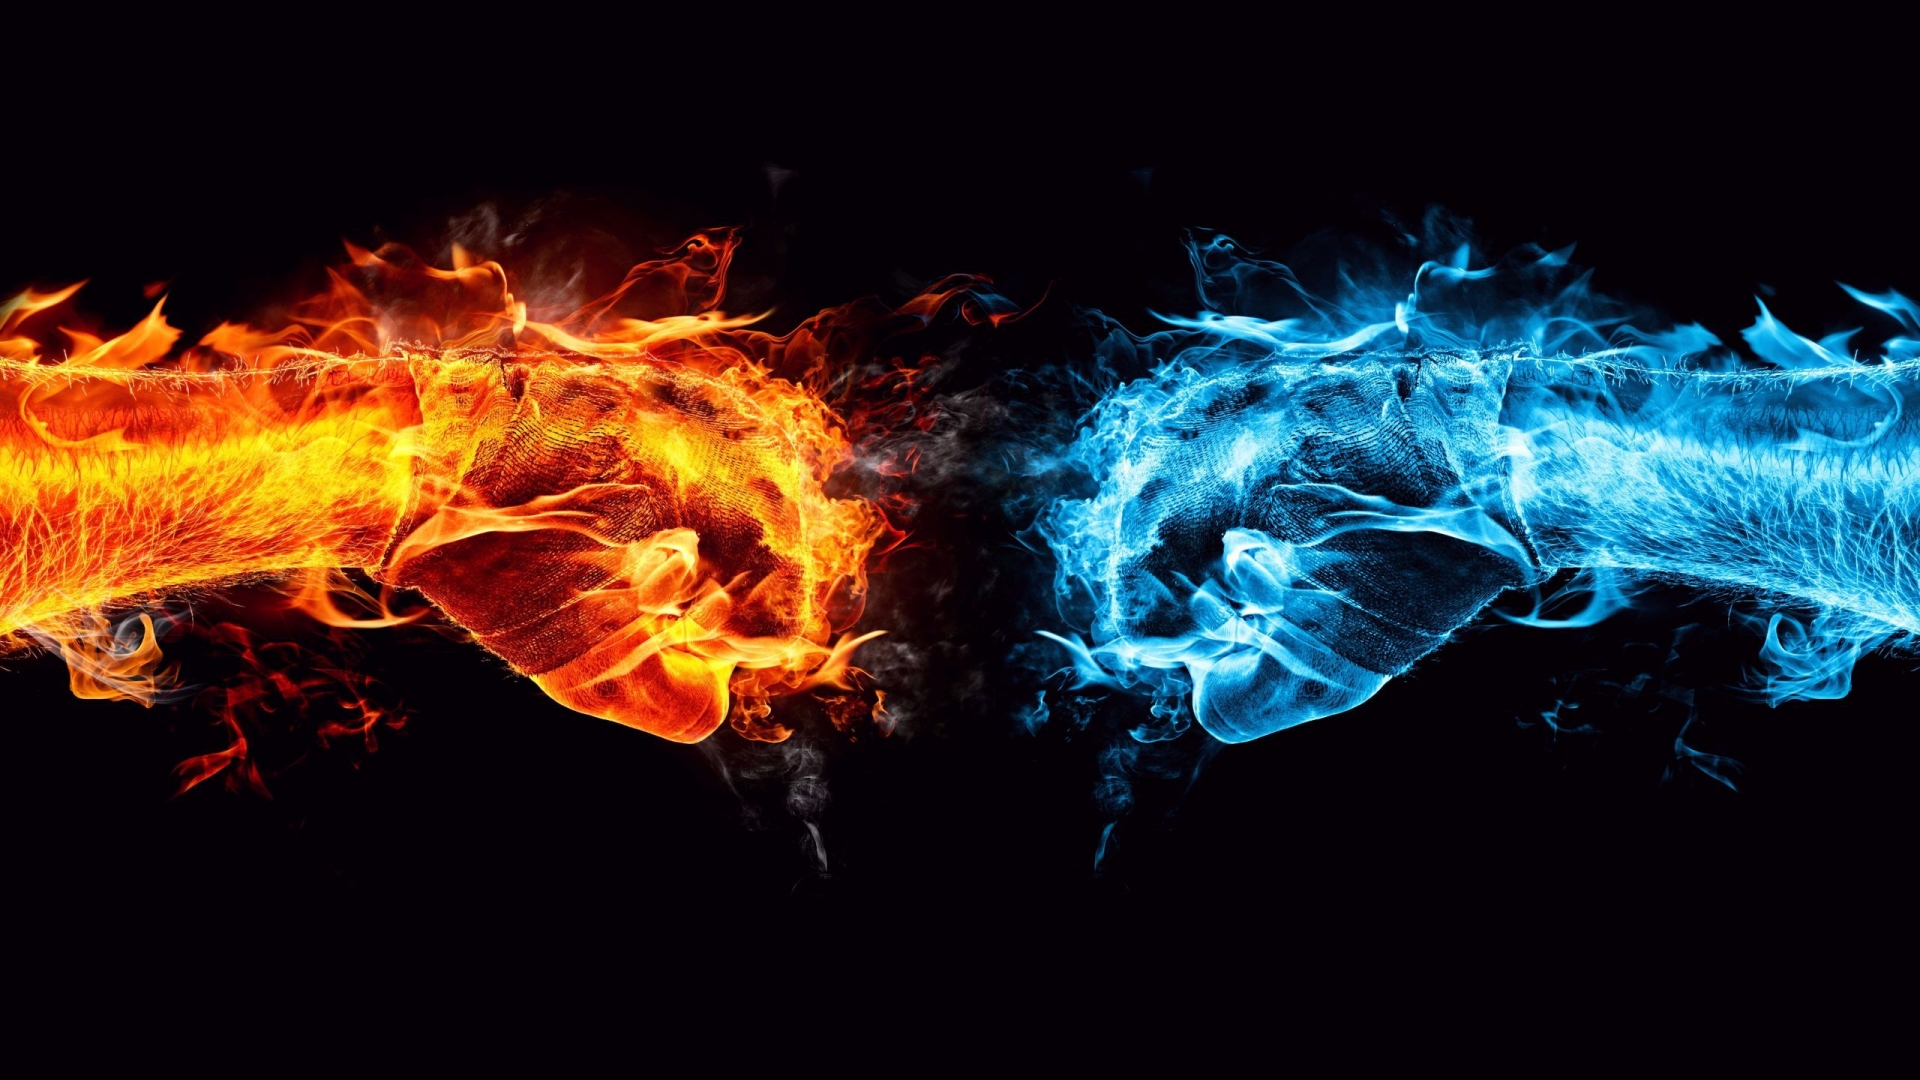 Fire and Ice Conflict for 1920 x 1080 HDTV 1080p resolution